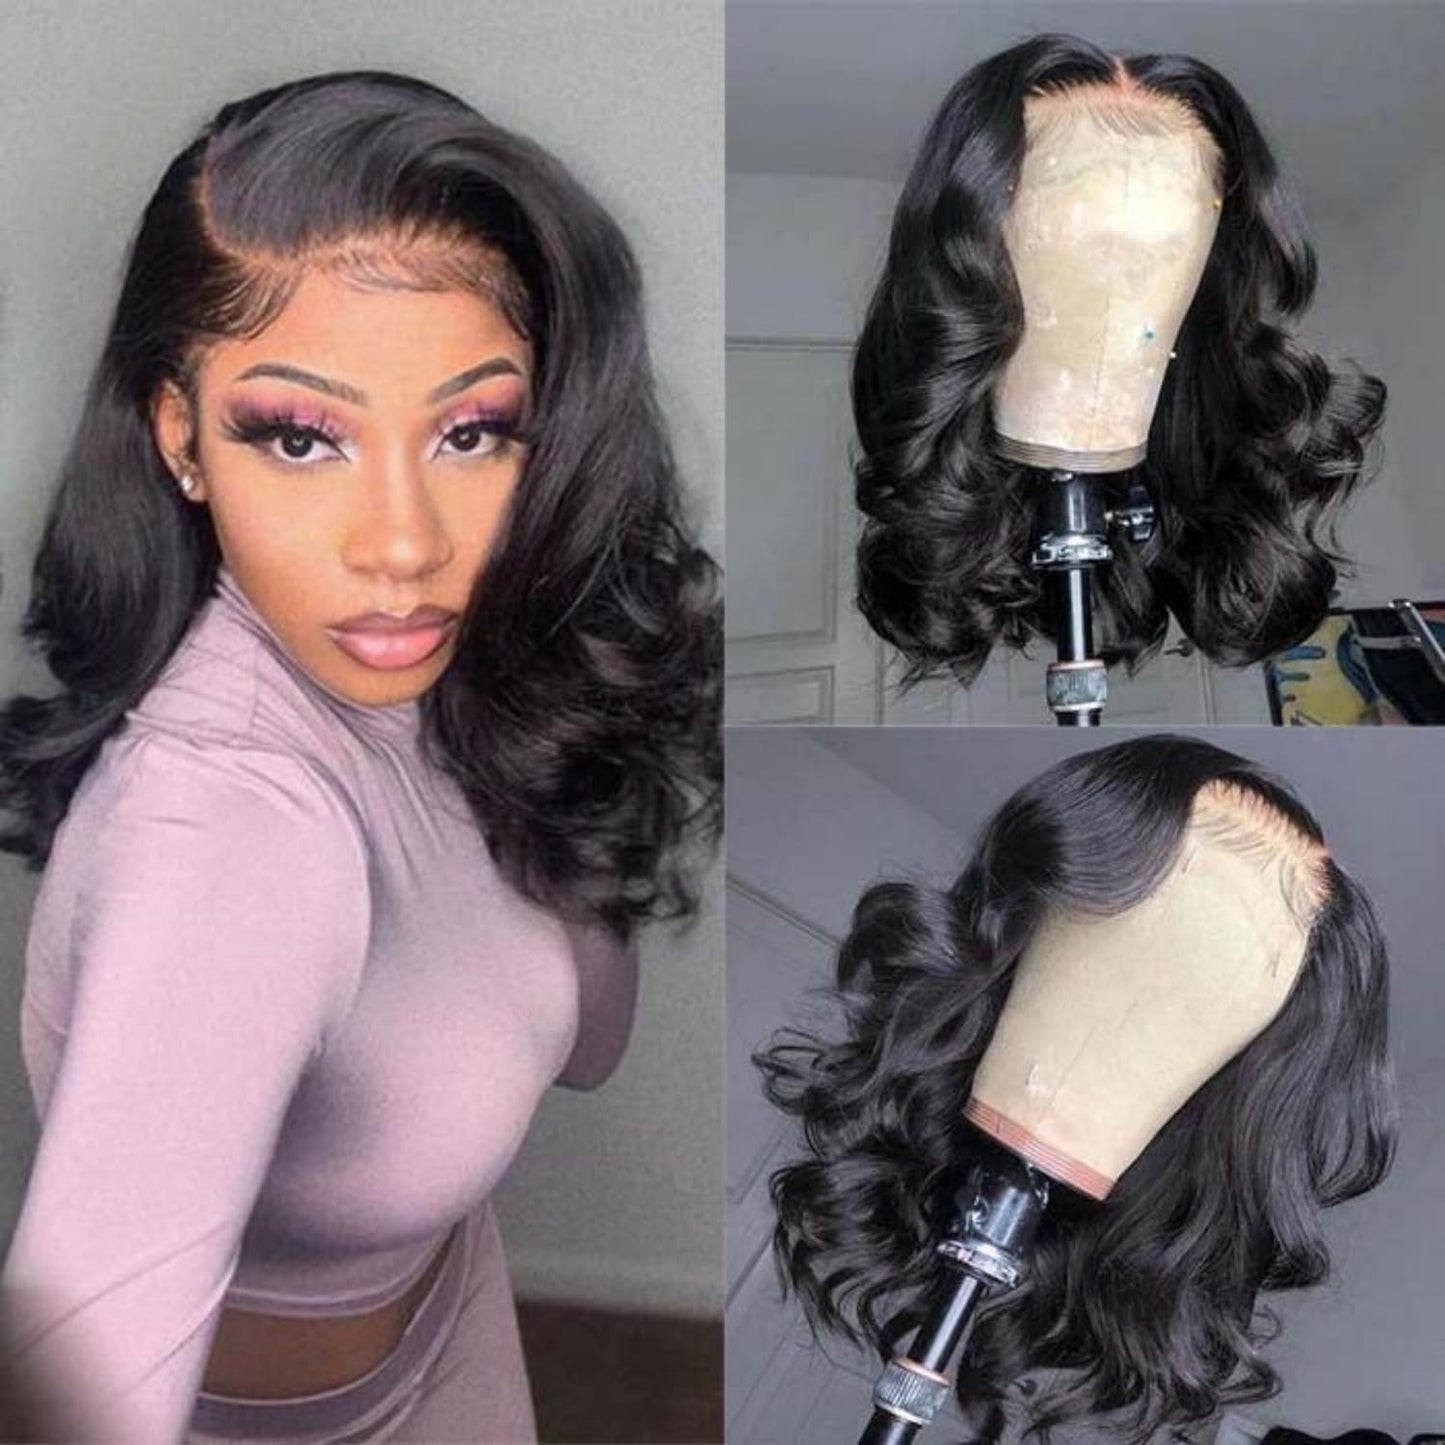 Natural Hairline 100% human Virgin hair Glueless Body Wave Wig in 16 Inch length - All That & More Salon Presents up to 50% off- Hope & Hair Breast Cancer Awareness Weekend Event